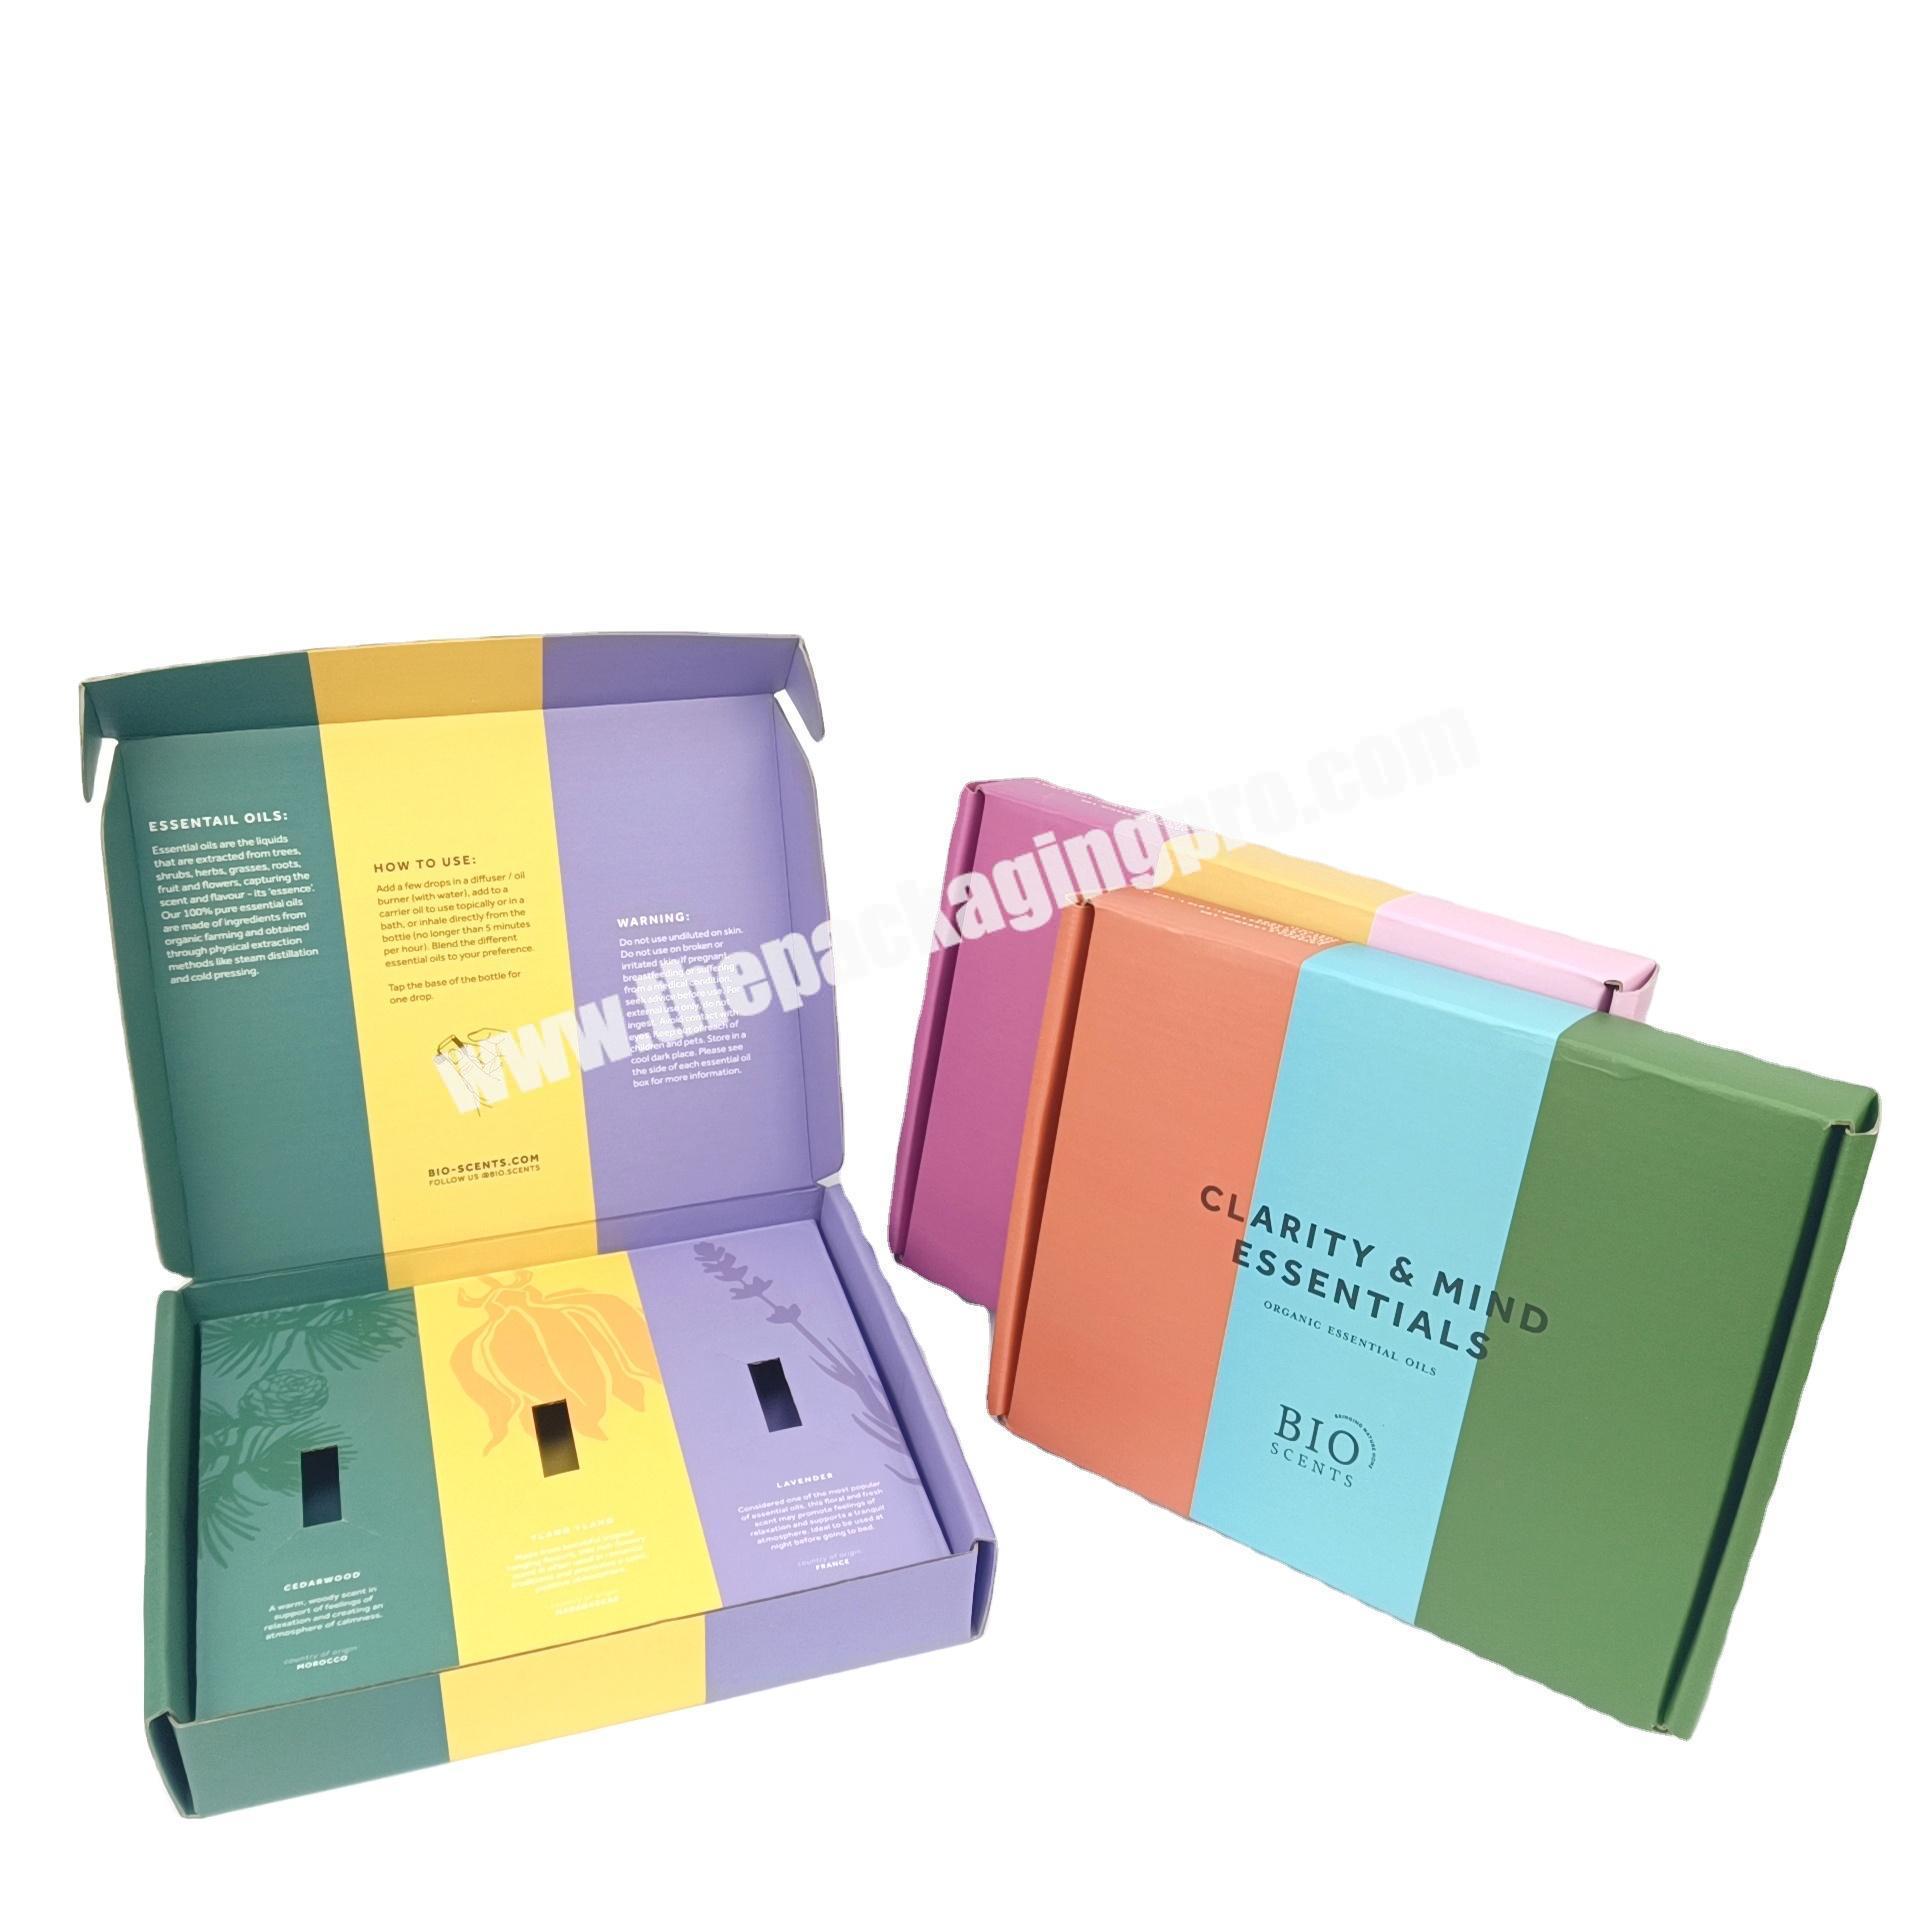 High quality skin care packaging paper boxes essential oils set boxes custom design